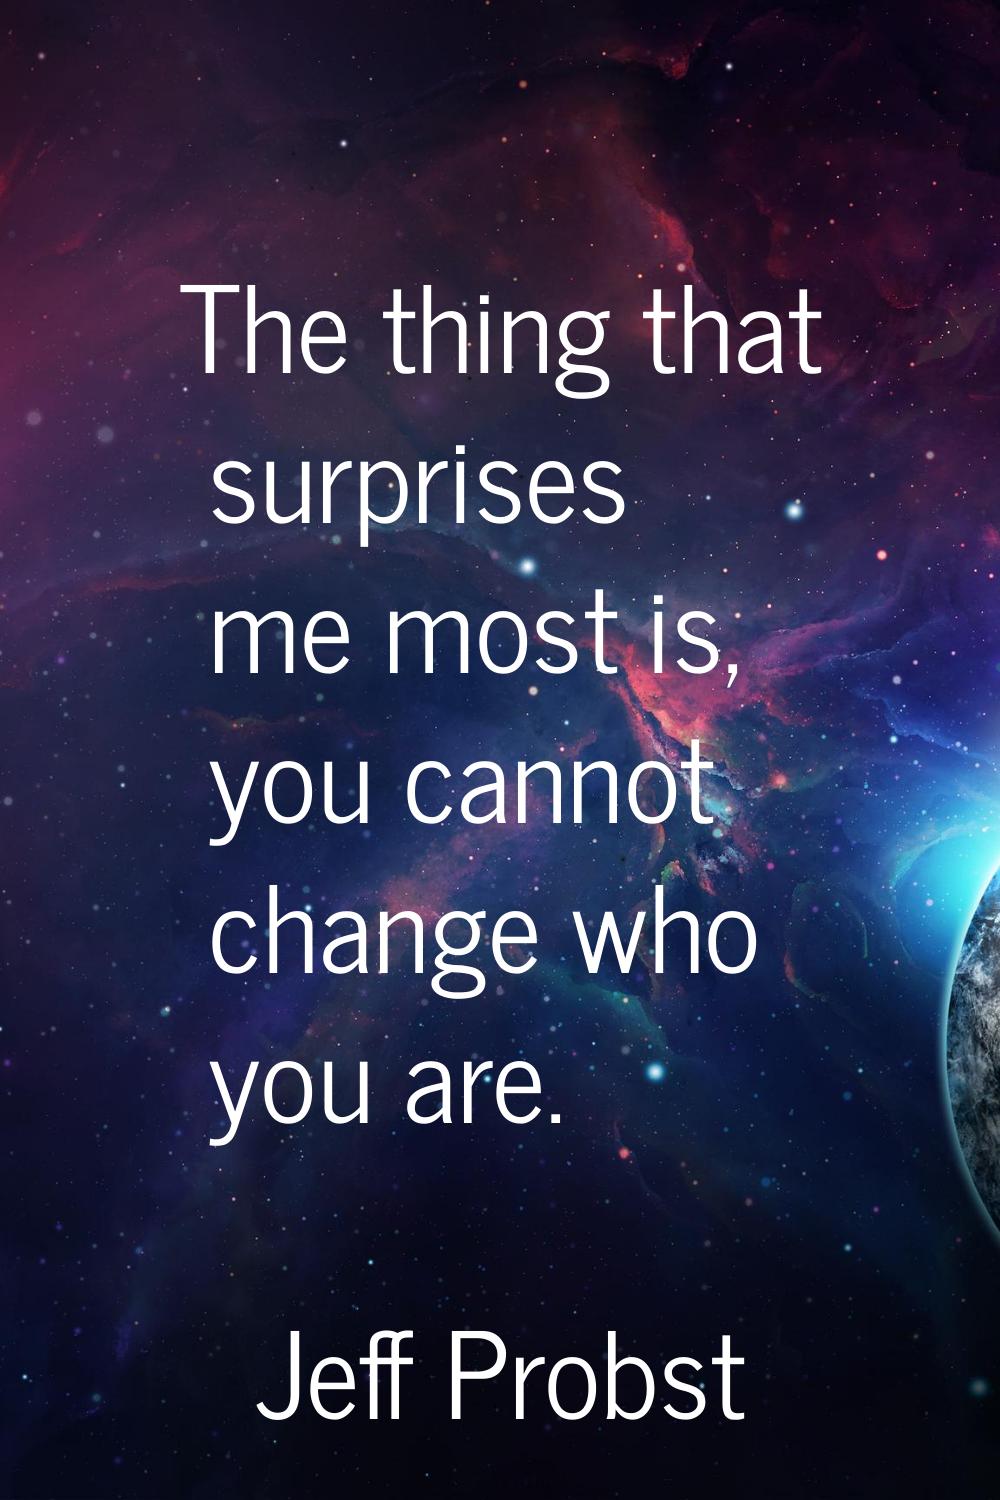 The thing that surprises me most is, you cannot change who you are.